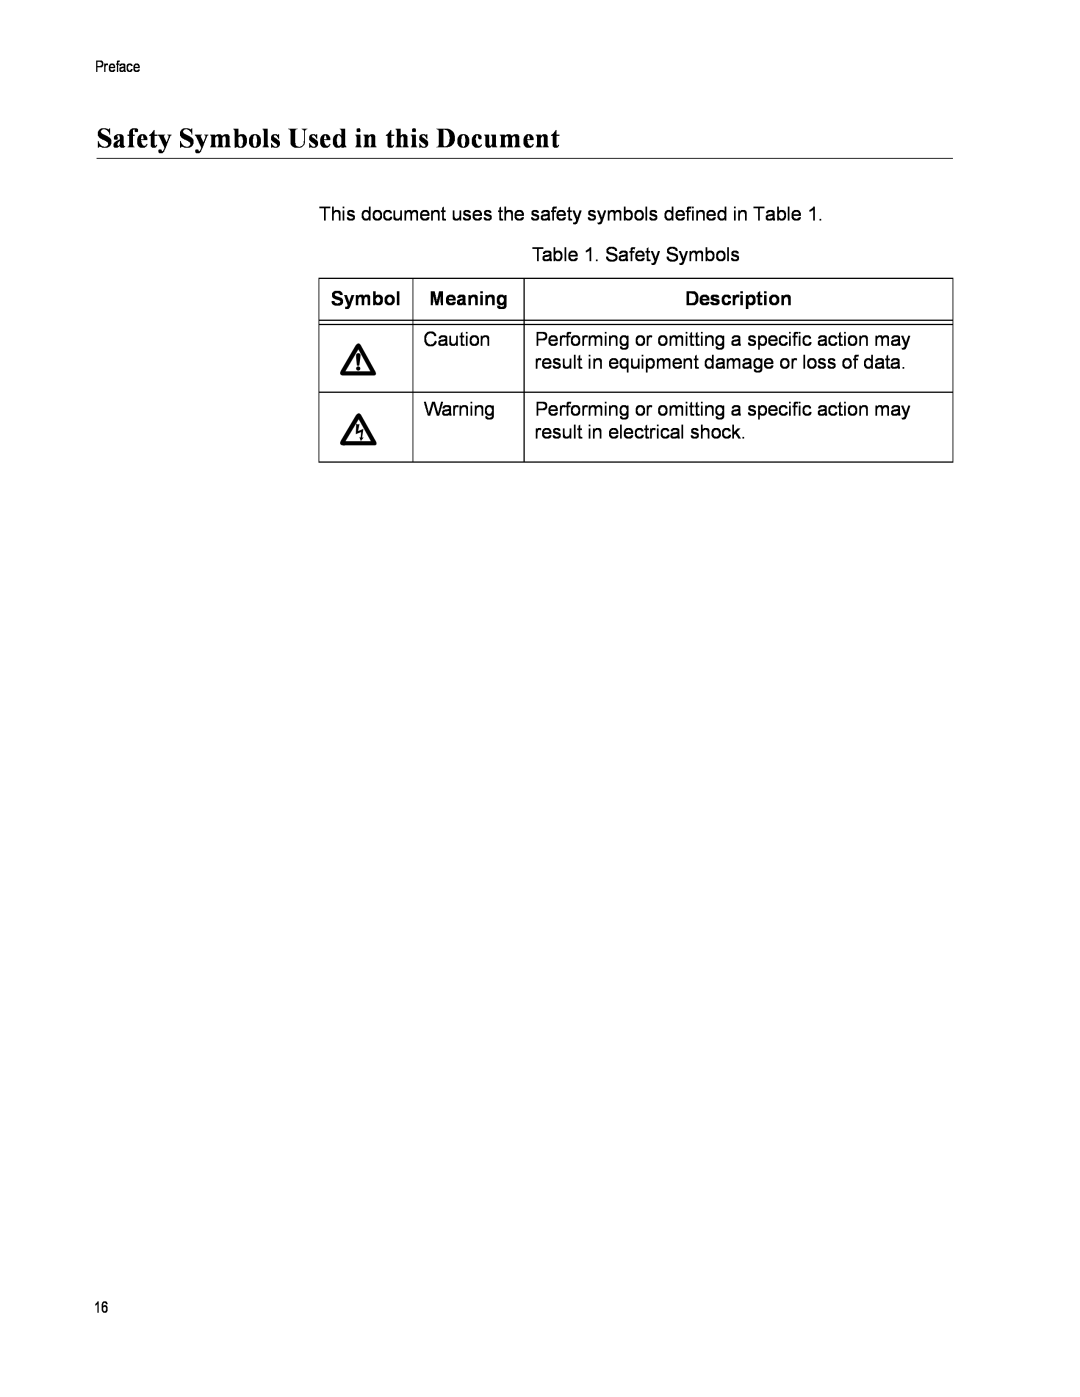 Allied Telesis x600-24Ts-POE manual Safety Symbols Used in this Document, Meaning, Description 